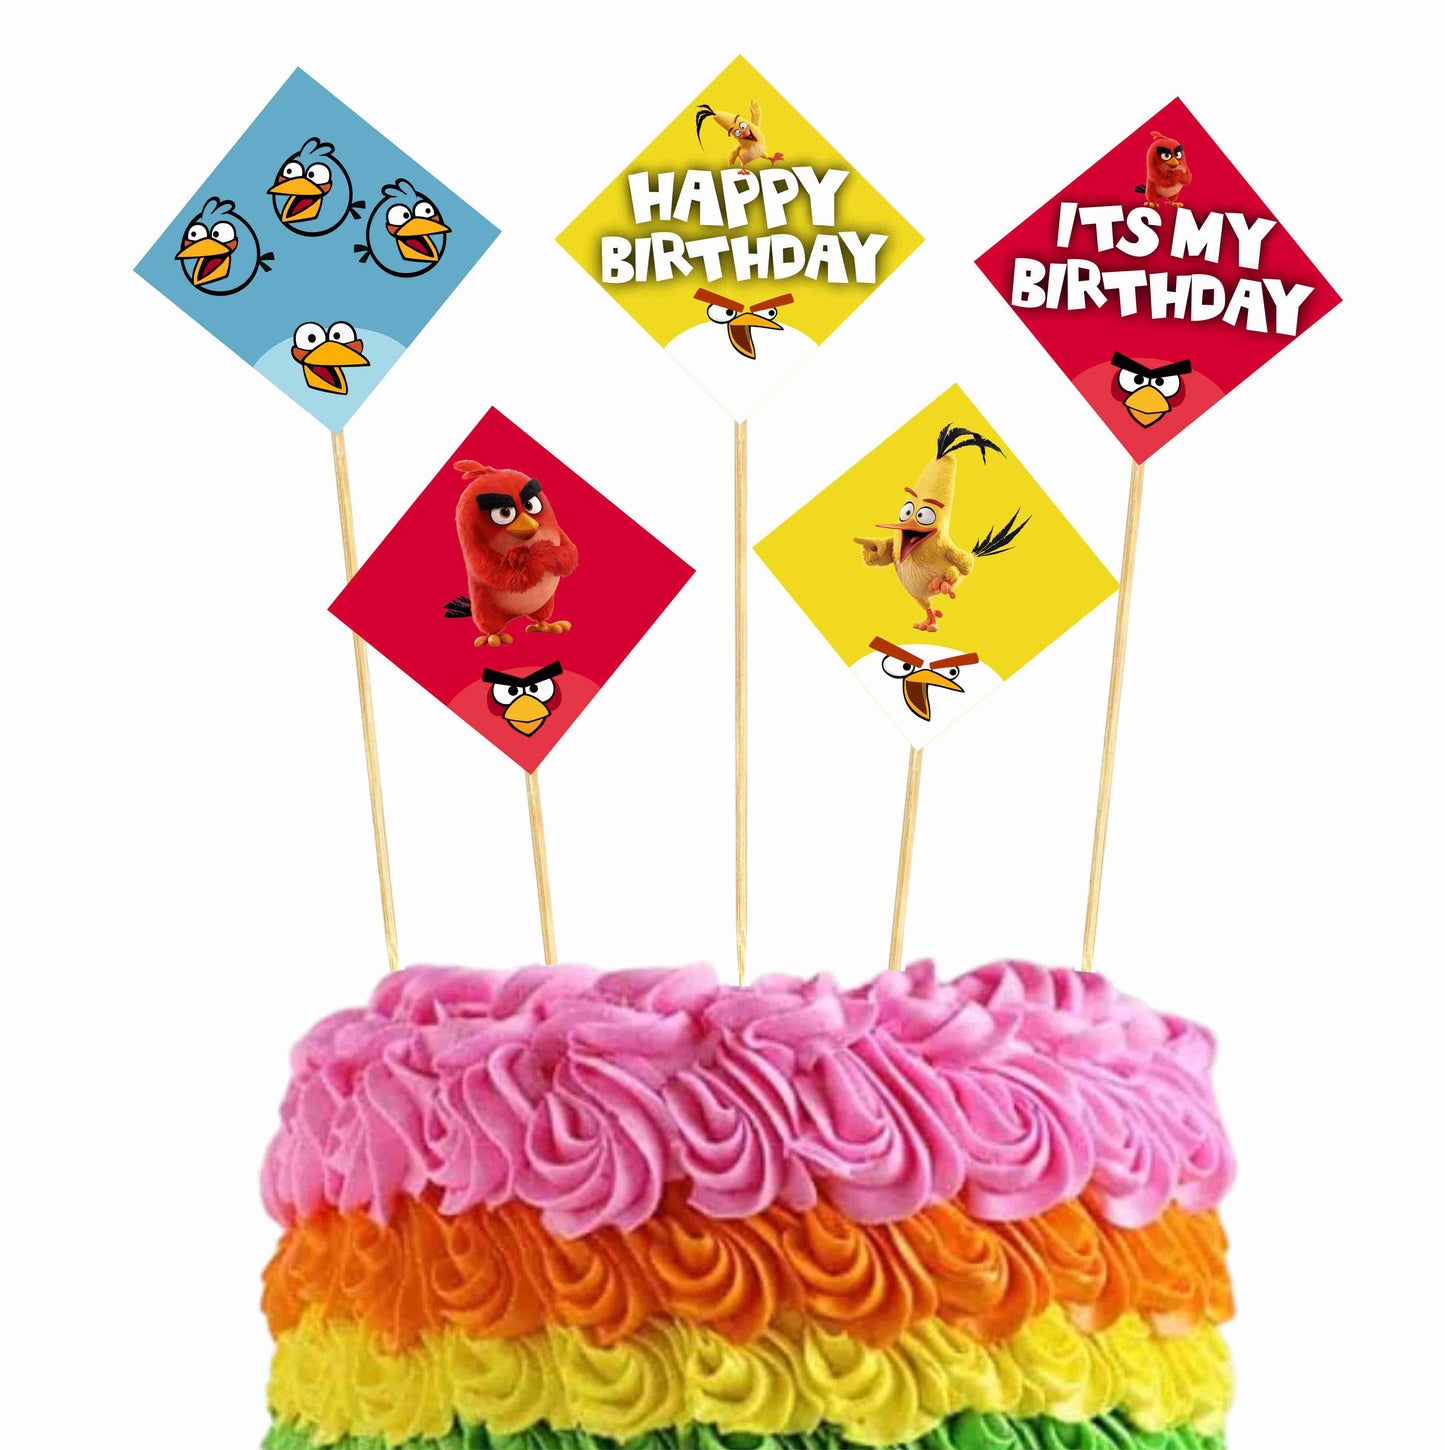 Angry Birds Theme Cake Topper Pack of 10 Nos for Birthday Cake Decoration Theme Party Item For Boys Girls Adults Birthday Theme Decor